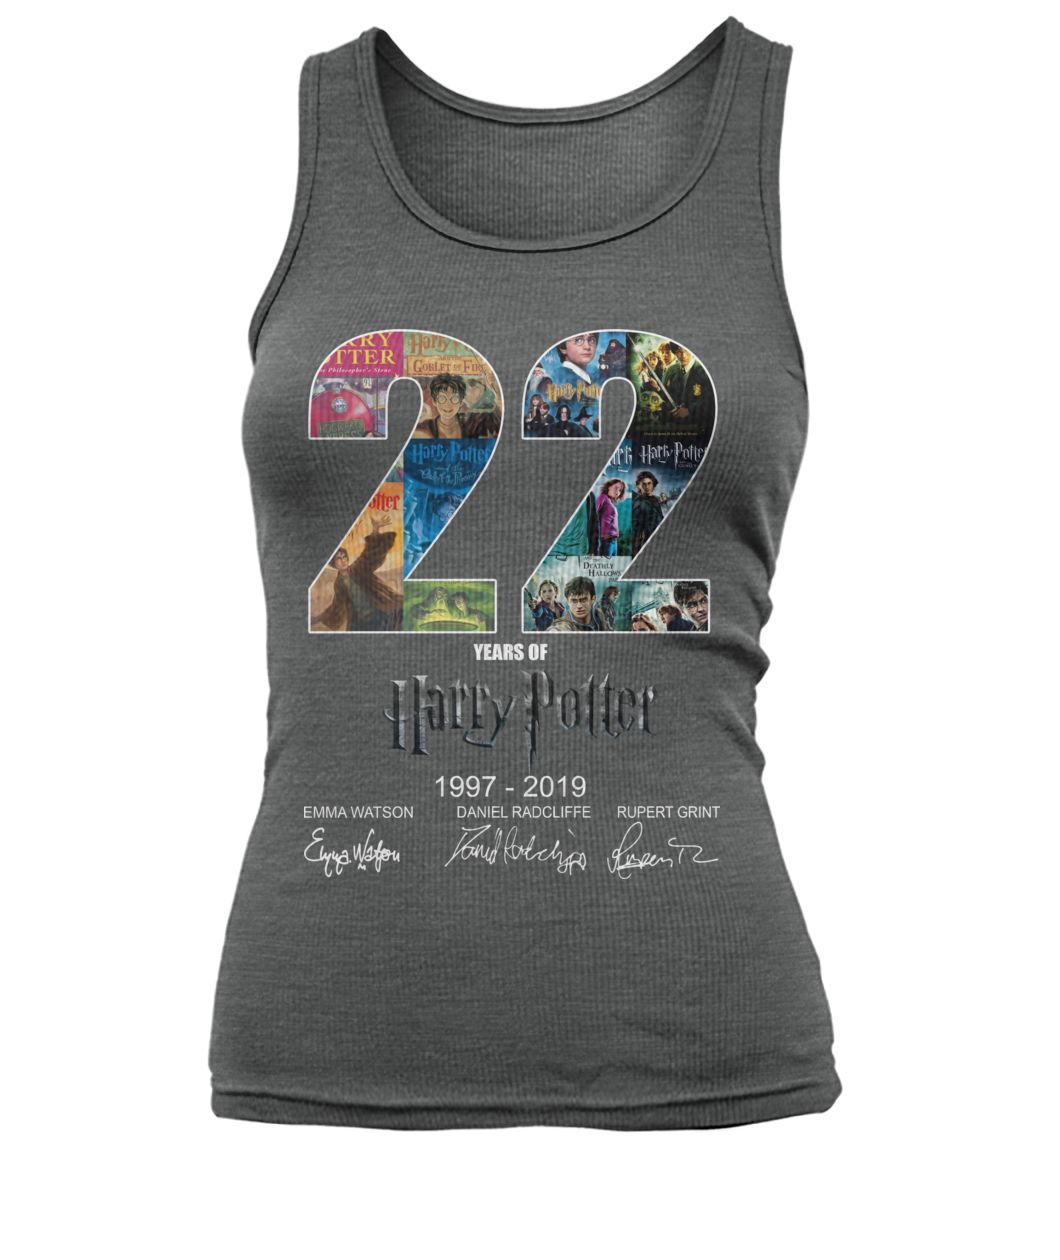 22 year of harry potter 1997 2019 signatures women's tank top